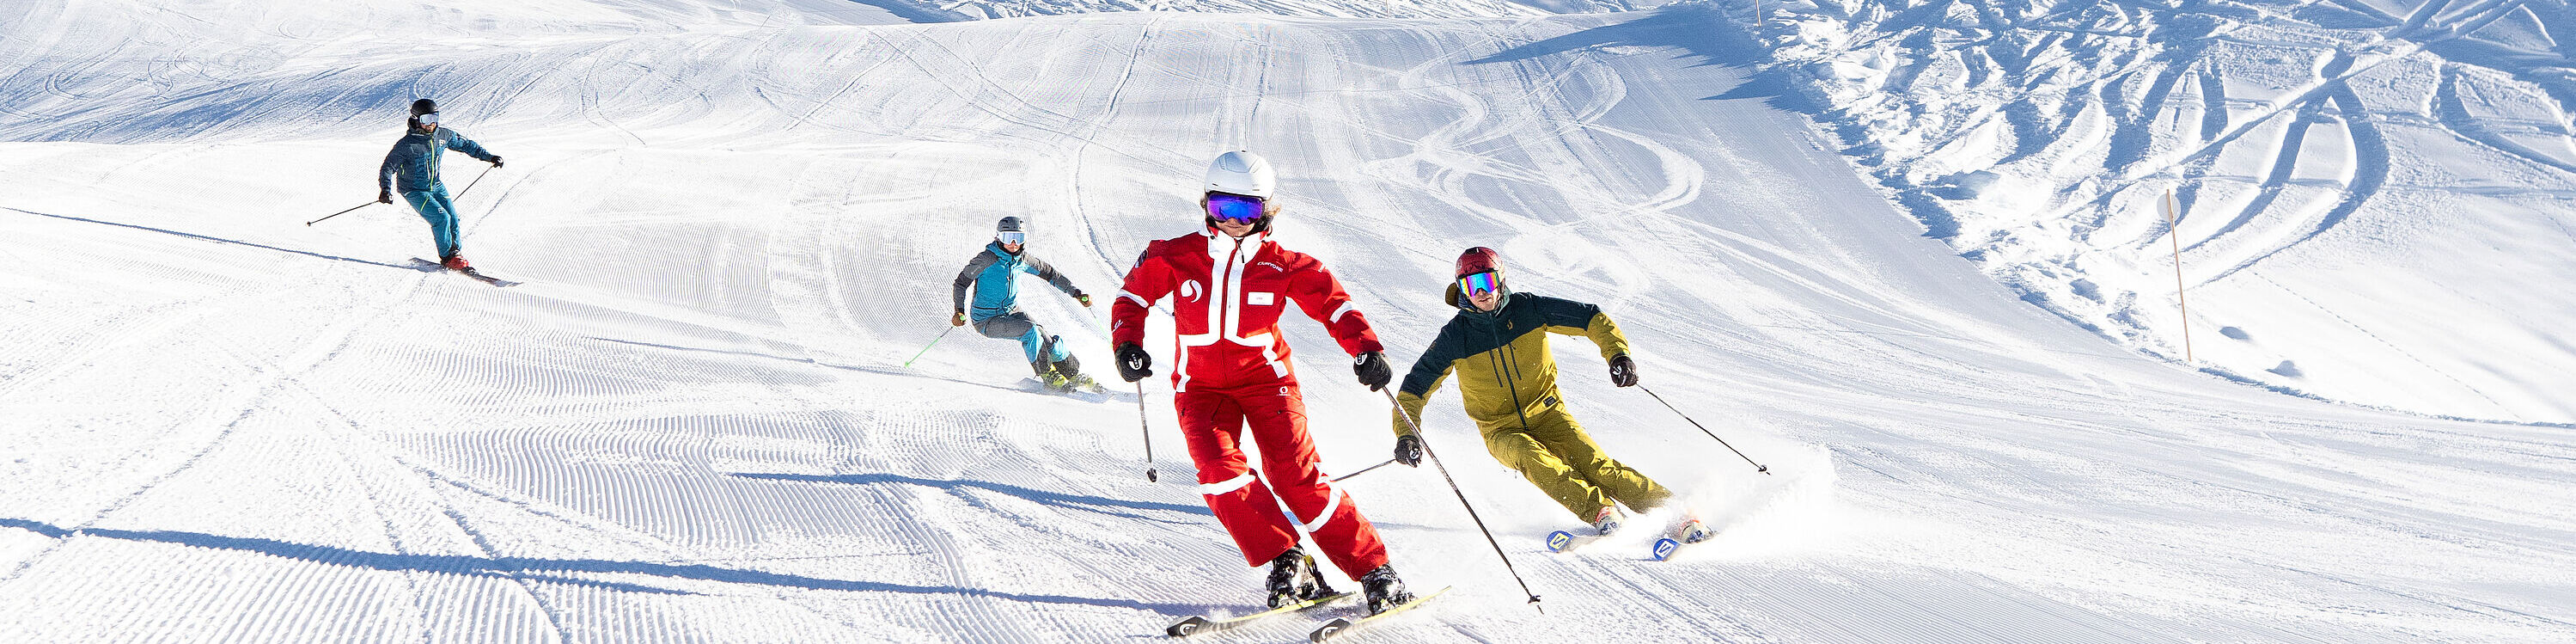 An advanced ski group is following their ski instructor, making easy turns